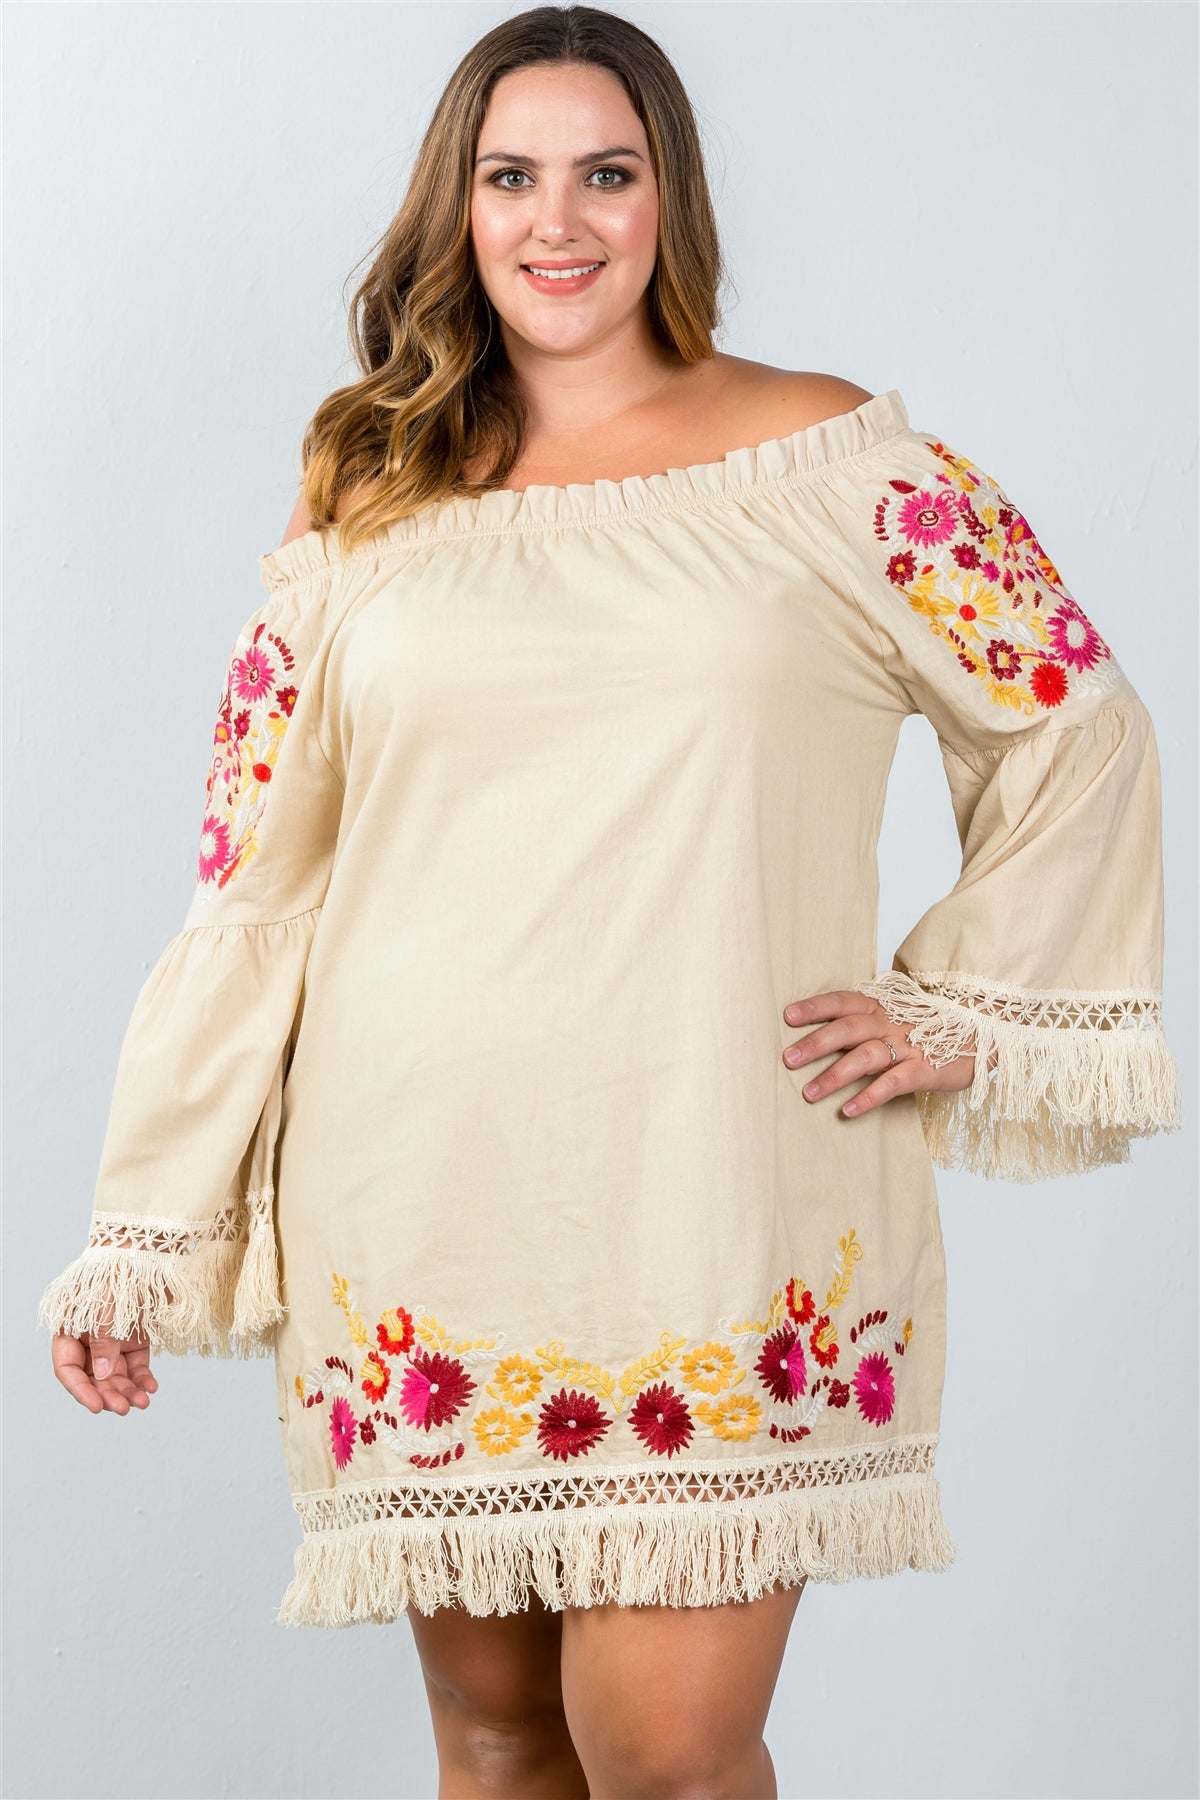 Ladies fashion plus size frayed embroidered floral dress